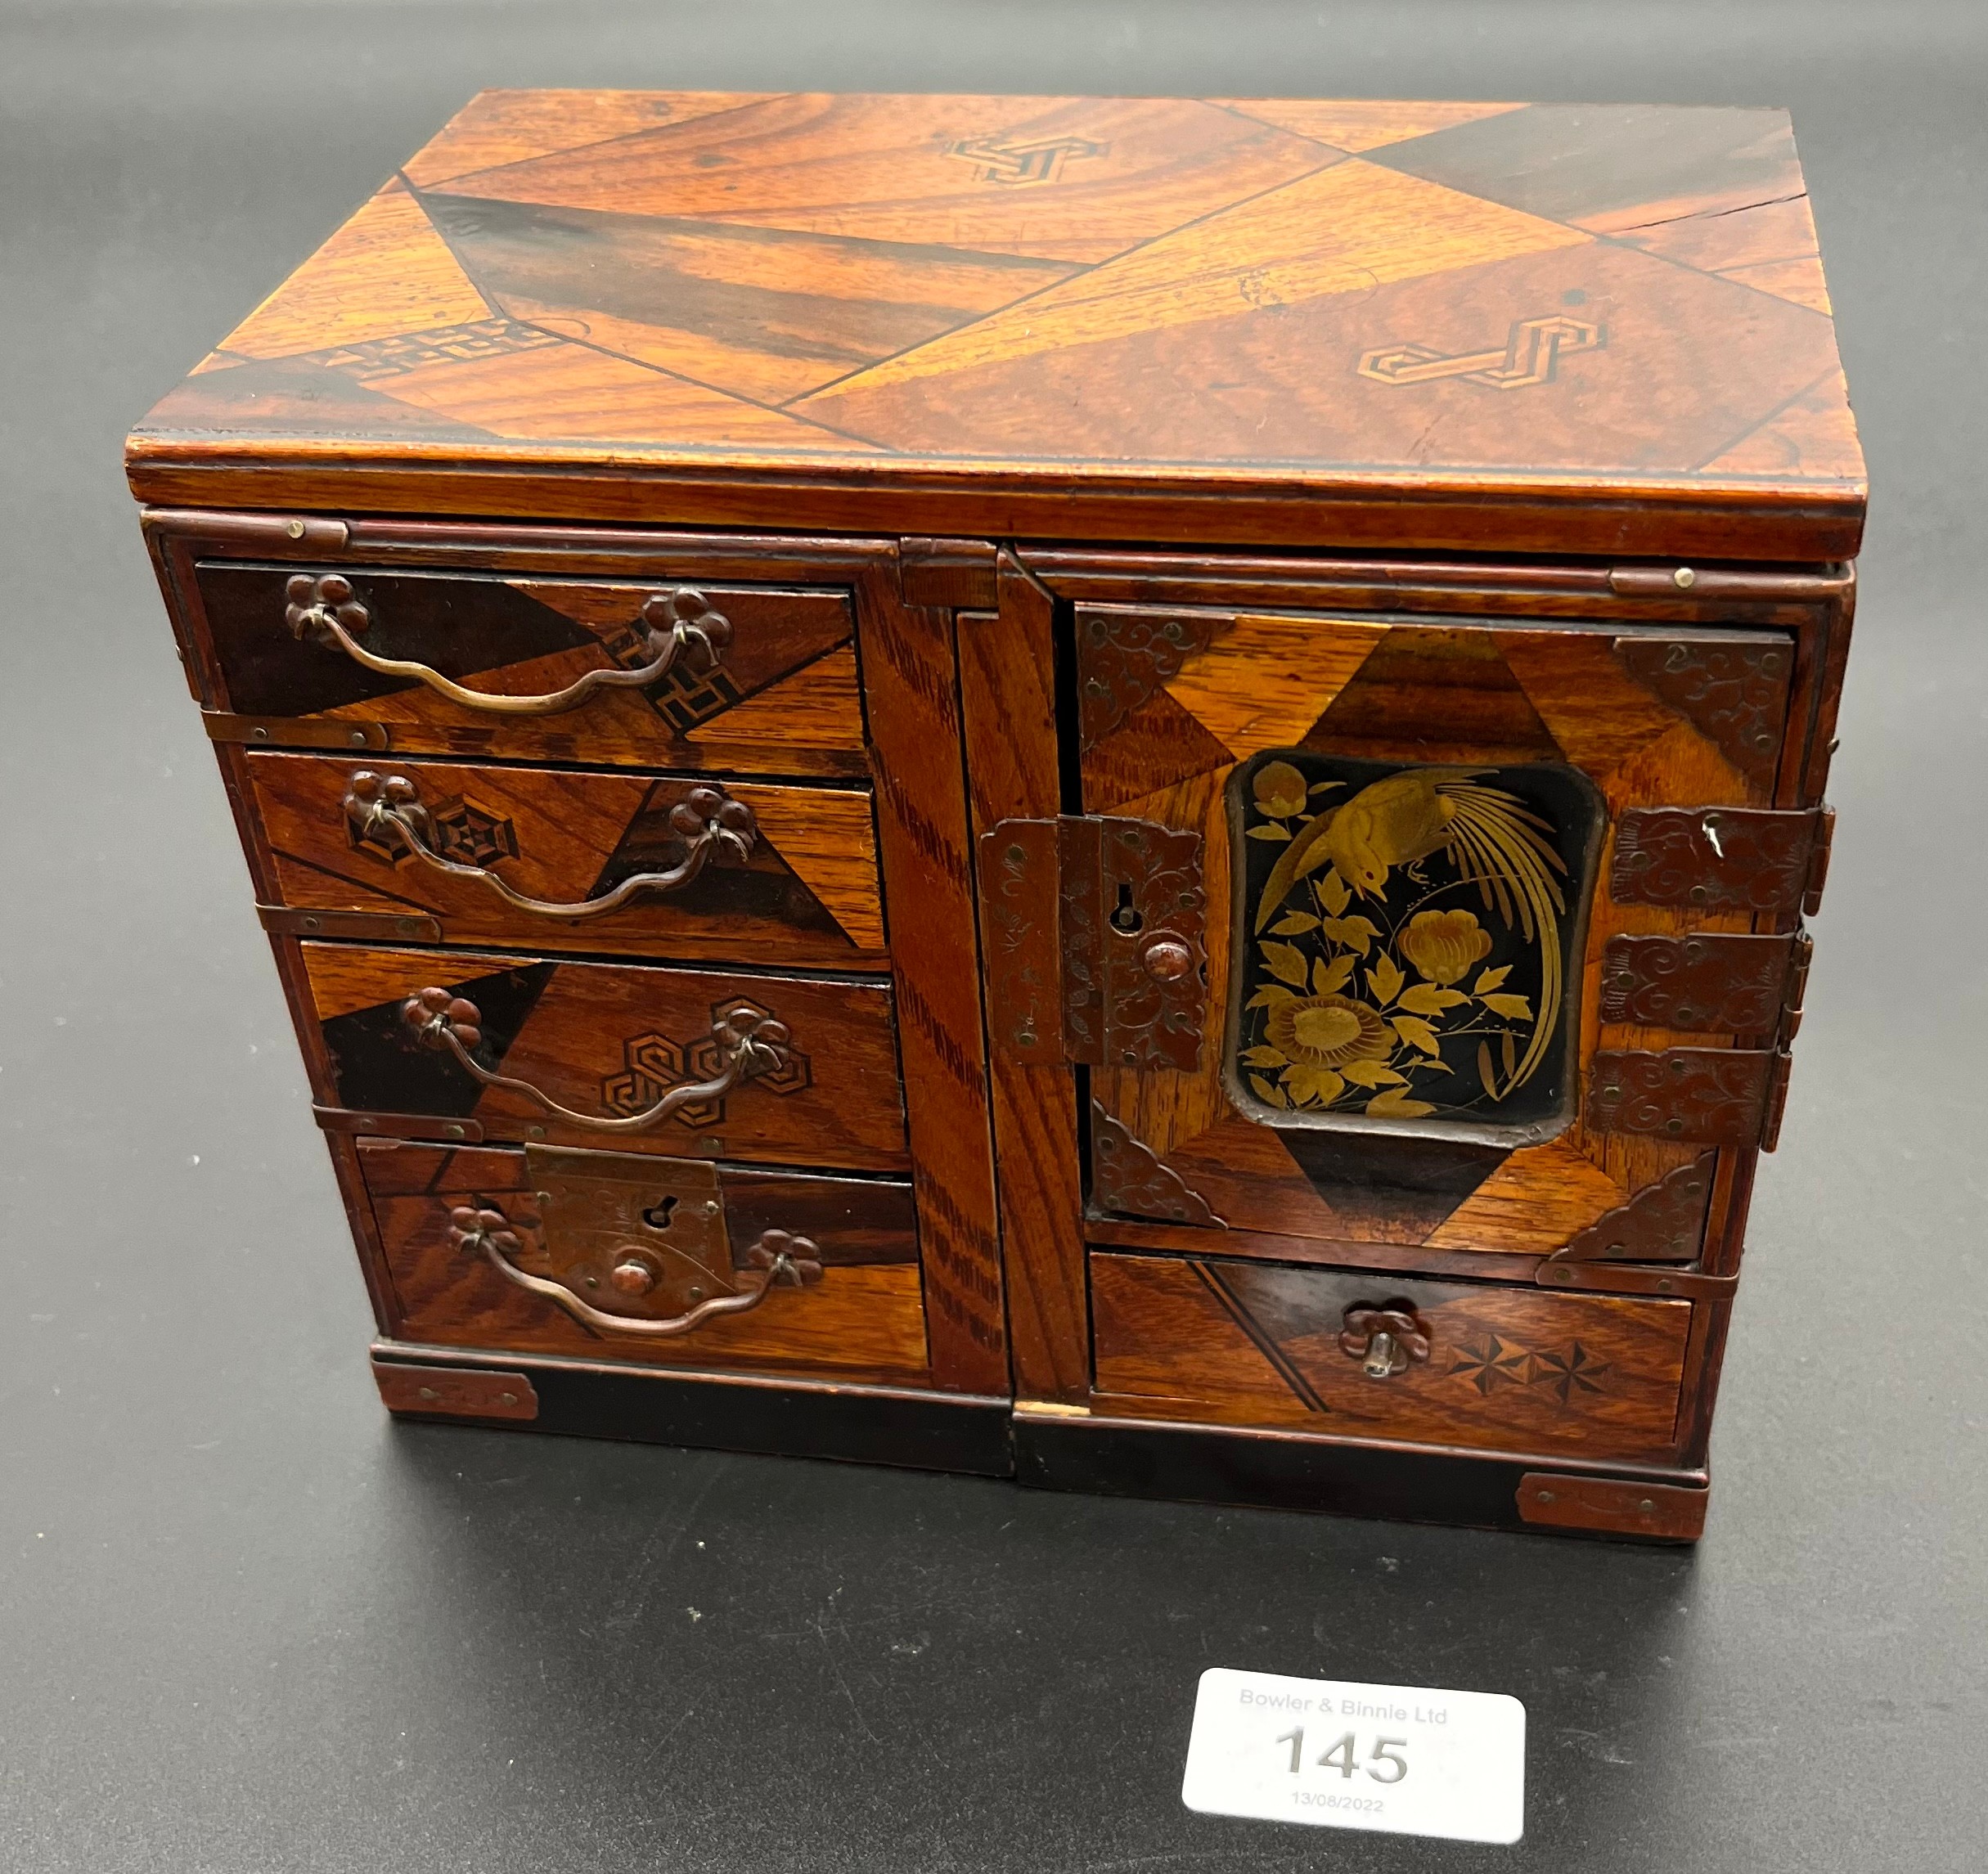 Antique Japanese Meiji period table top miniature cabinet. [14.5x17.5x11.5cm] [Will Post]